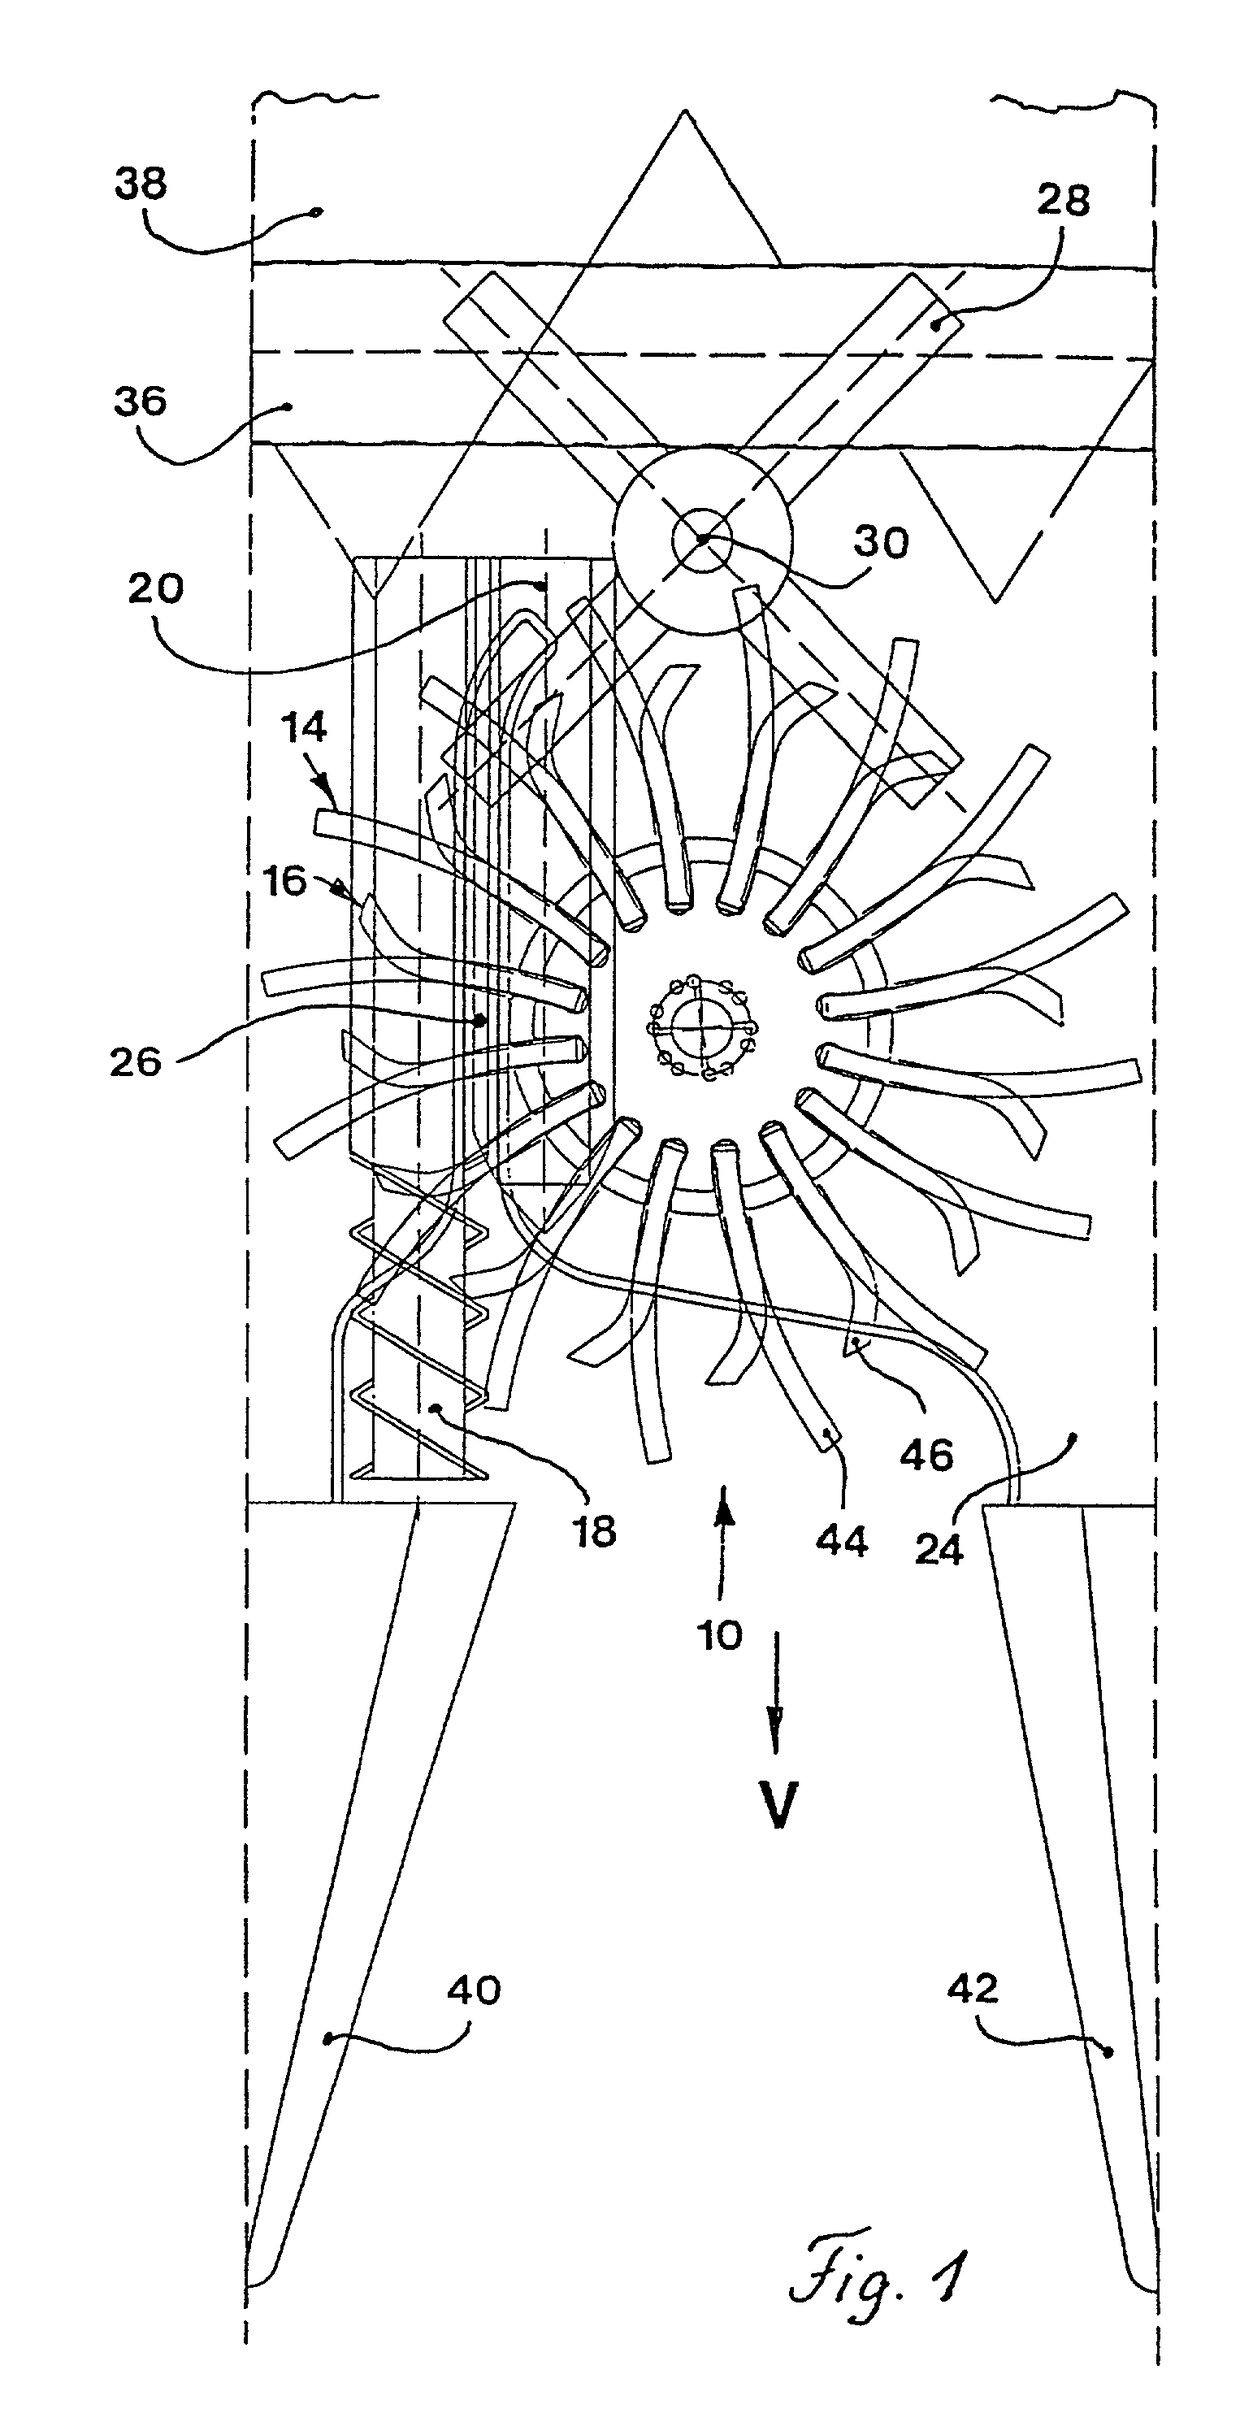 Row-insensitive feeding and picking device for an agricultural header